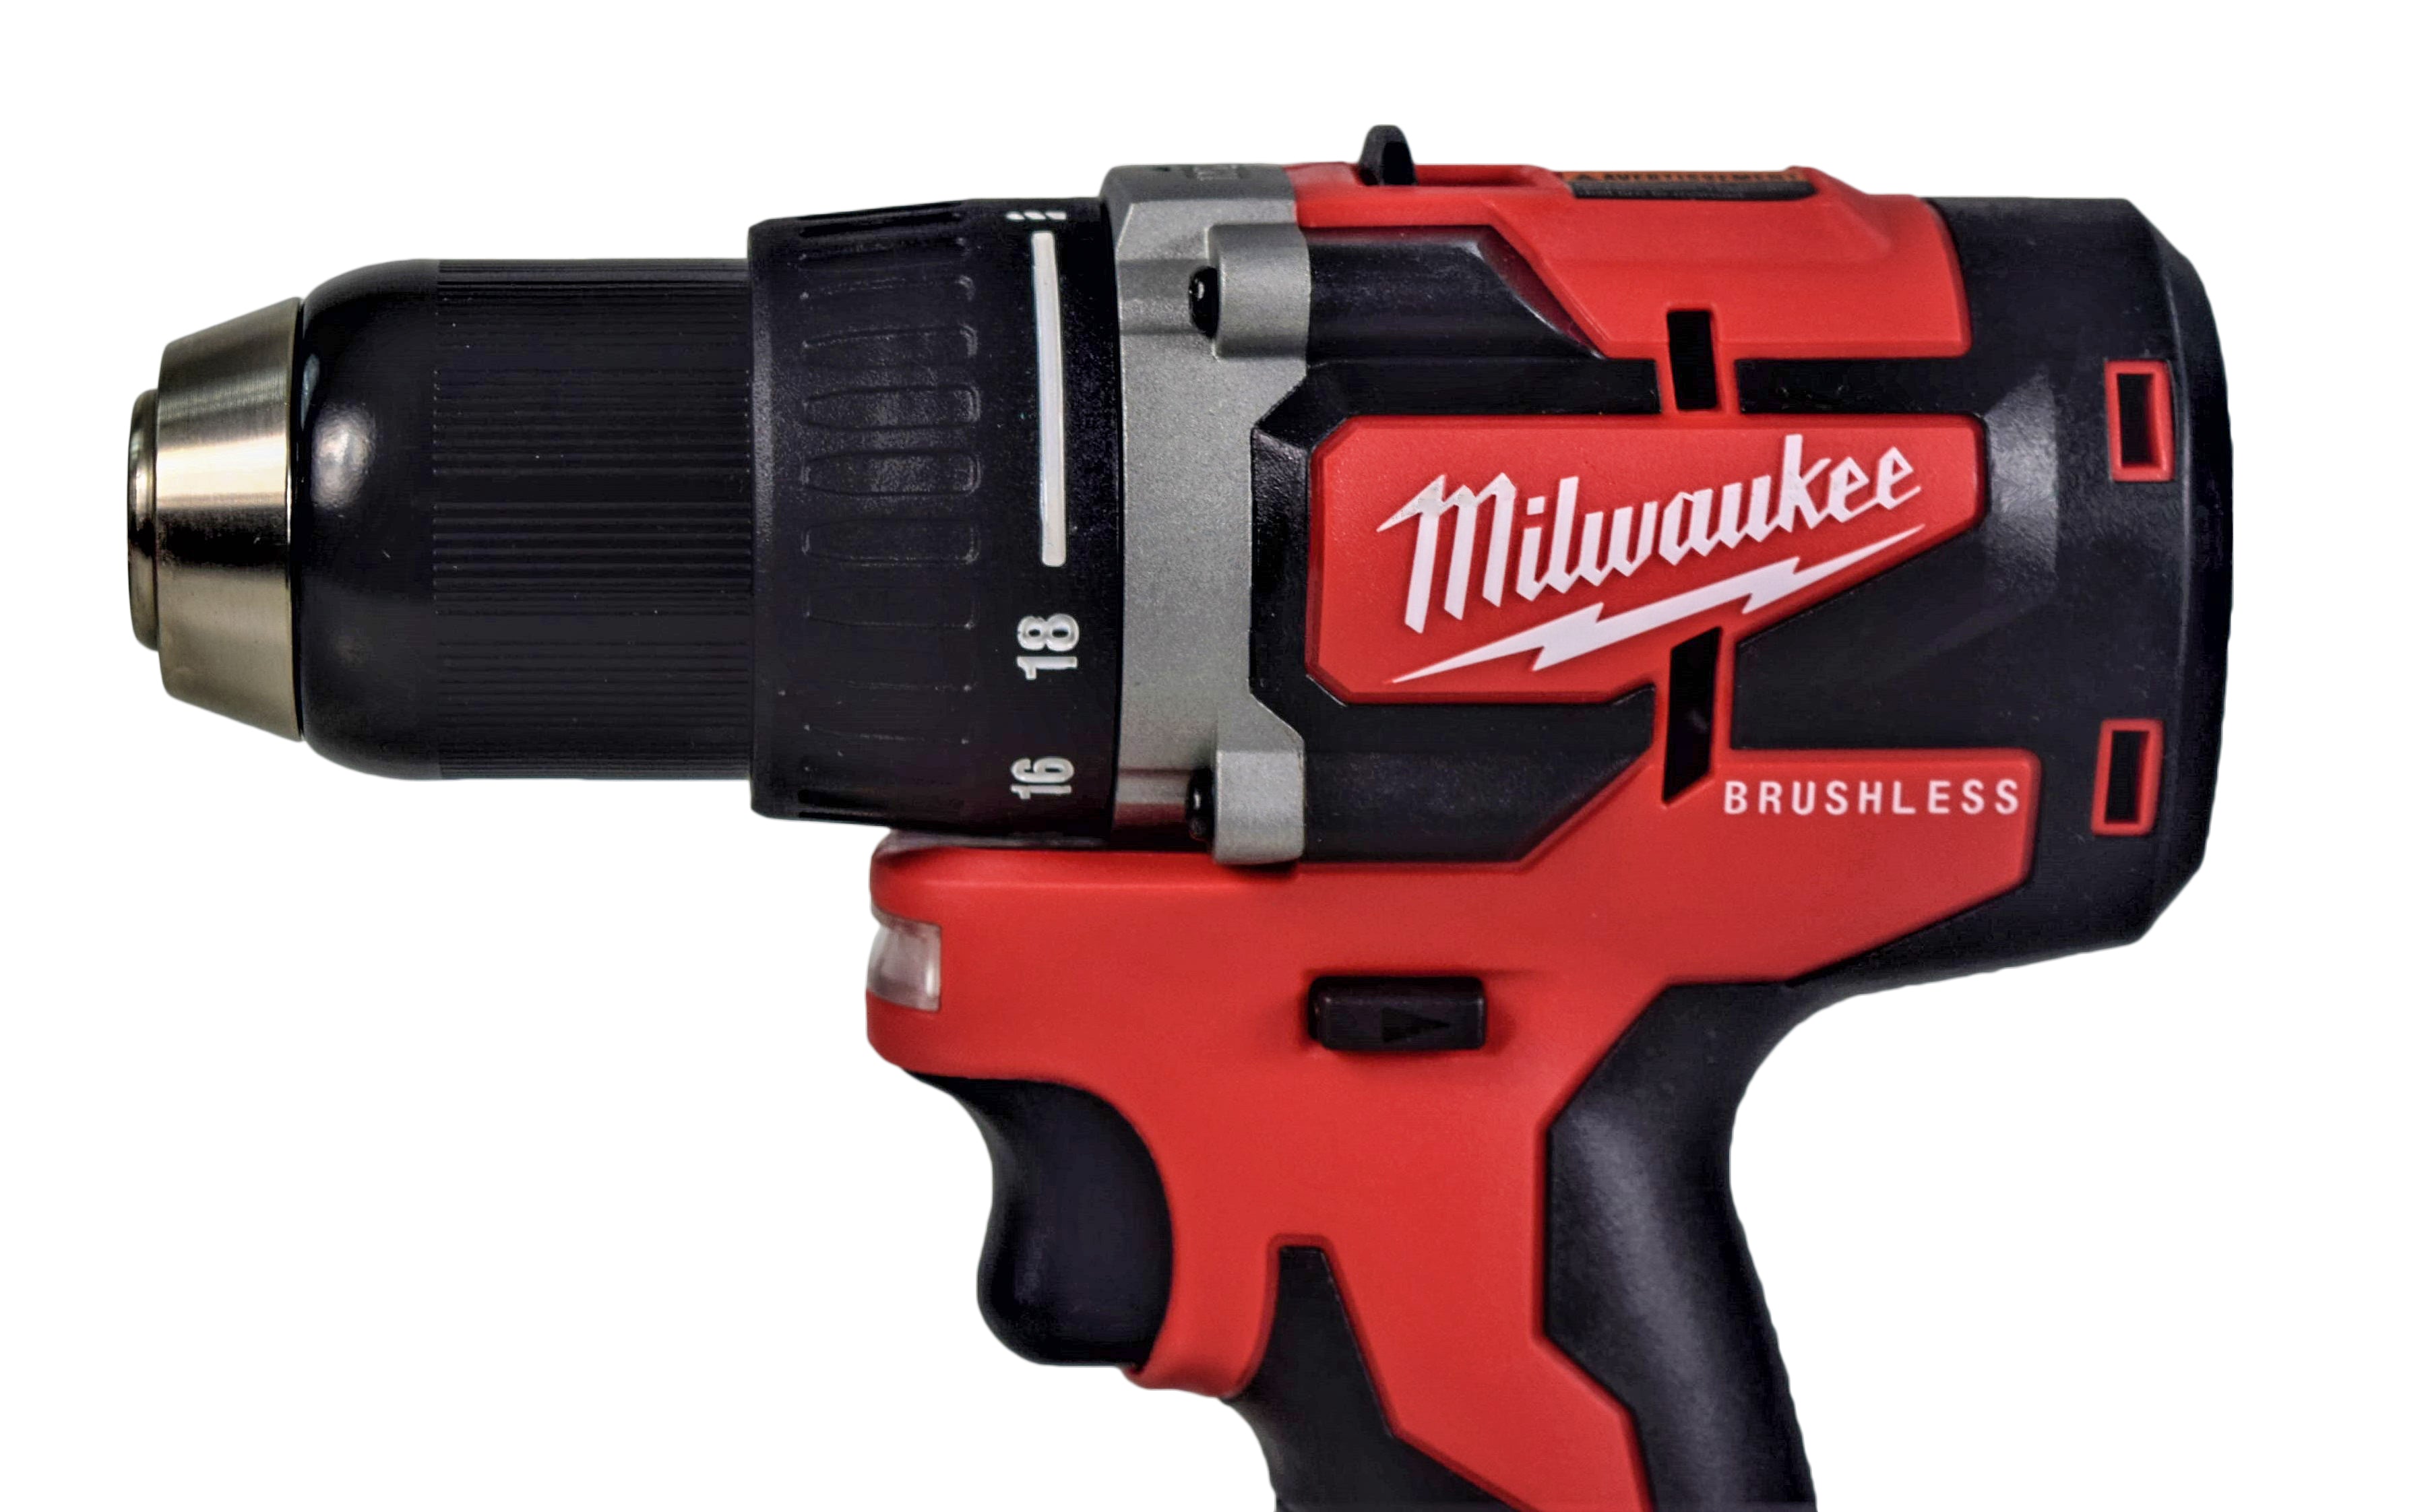 Milwaukee-2801-21P-M18-18-Volt-Lithium-Ion-Compact-Brushless-Cordless-1-2-in.-Drill-Driver-Kit-image-8